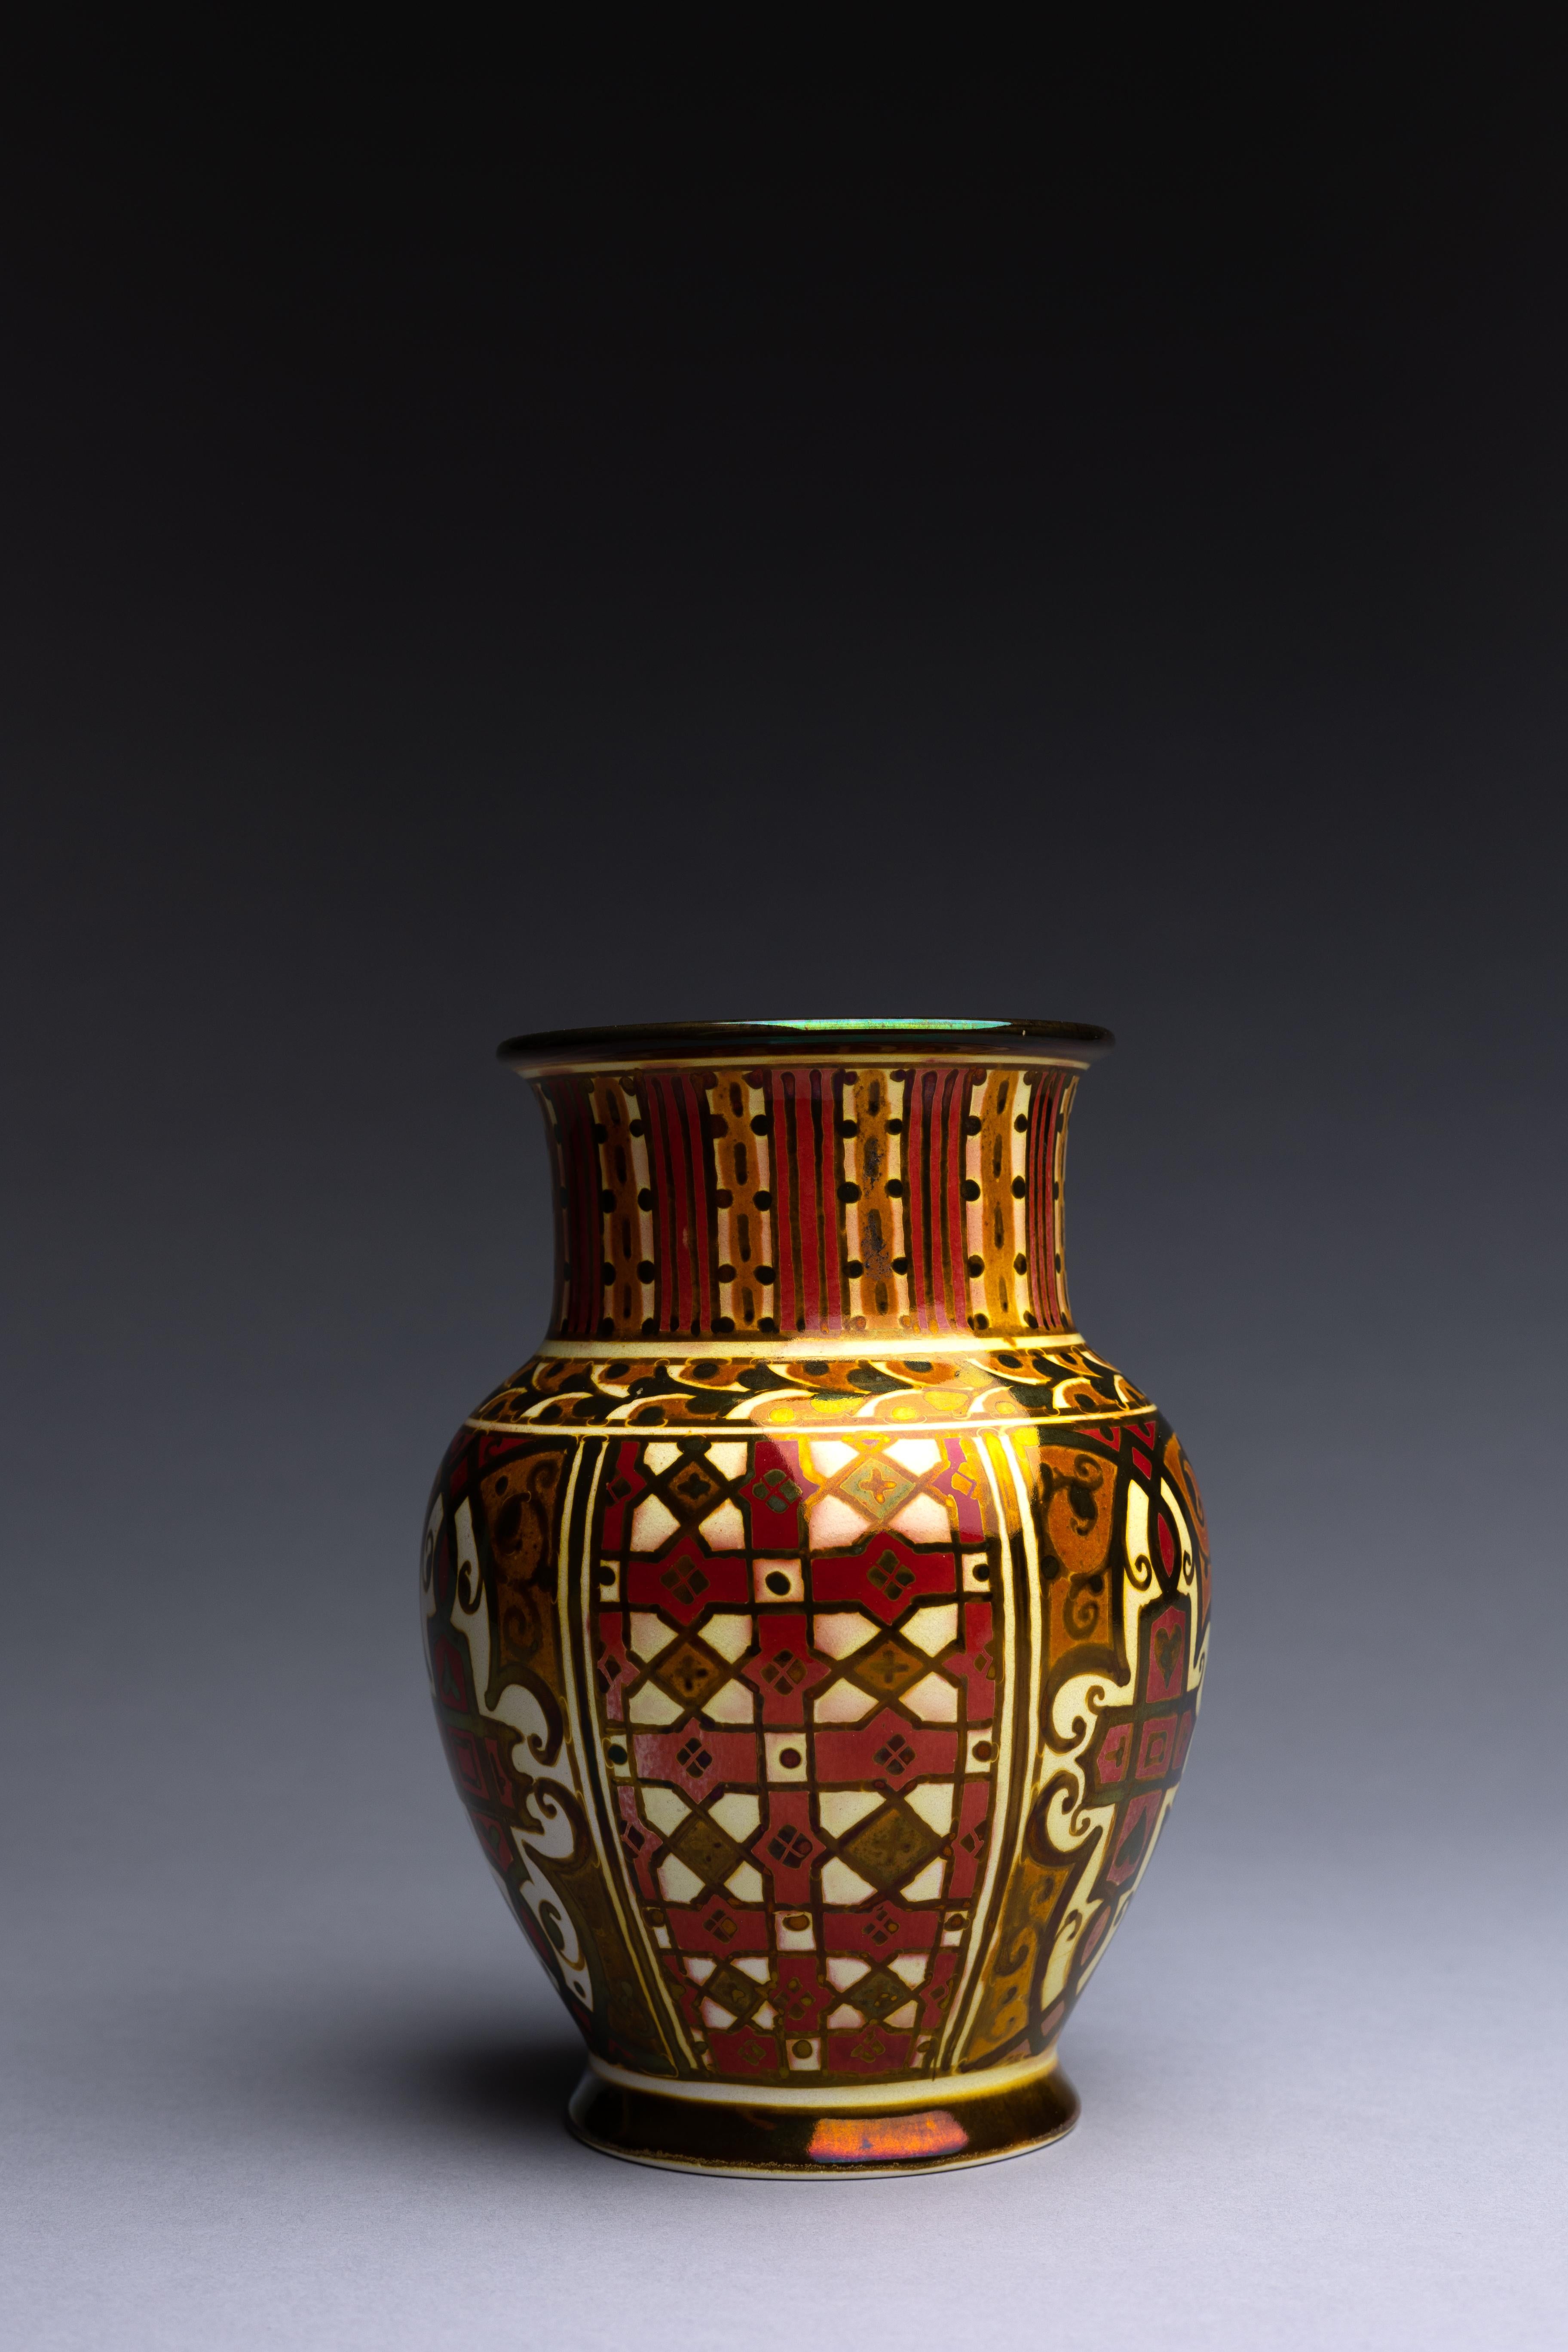 William S. Mycock for Pilkingtons Royal Lancastrian Pottery, a vase in stunning gold and ruby lustre glazes, created in 1920 in the dawn of the Art Deco style.

William Mycock’s gold and ruby lustre vase is emblematic of the high-quality